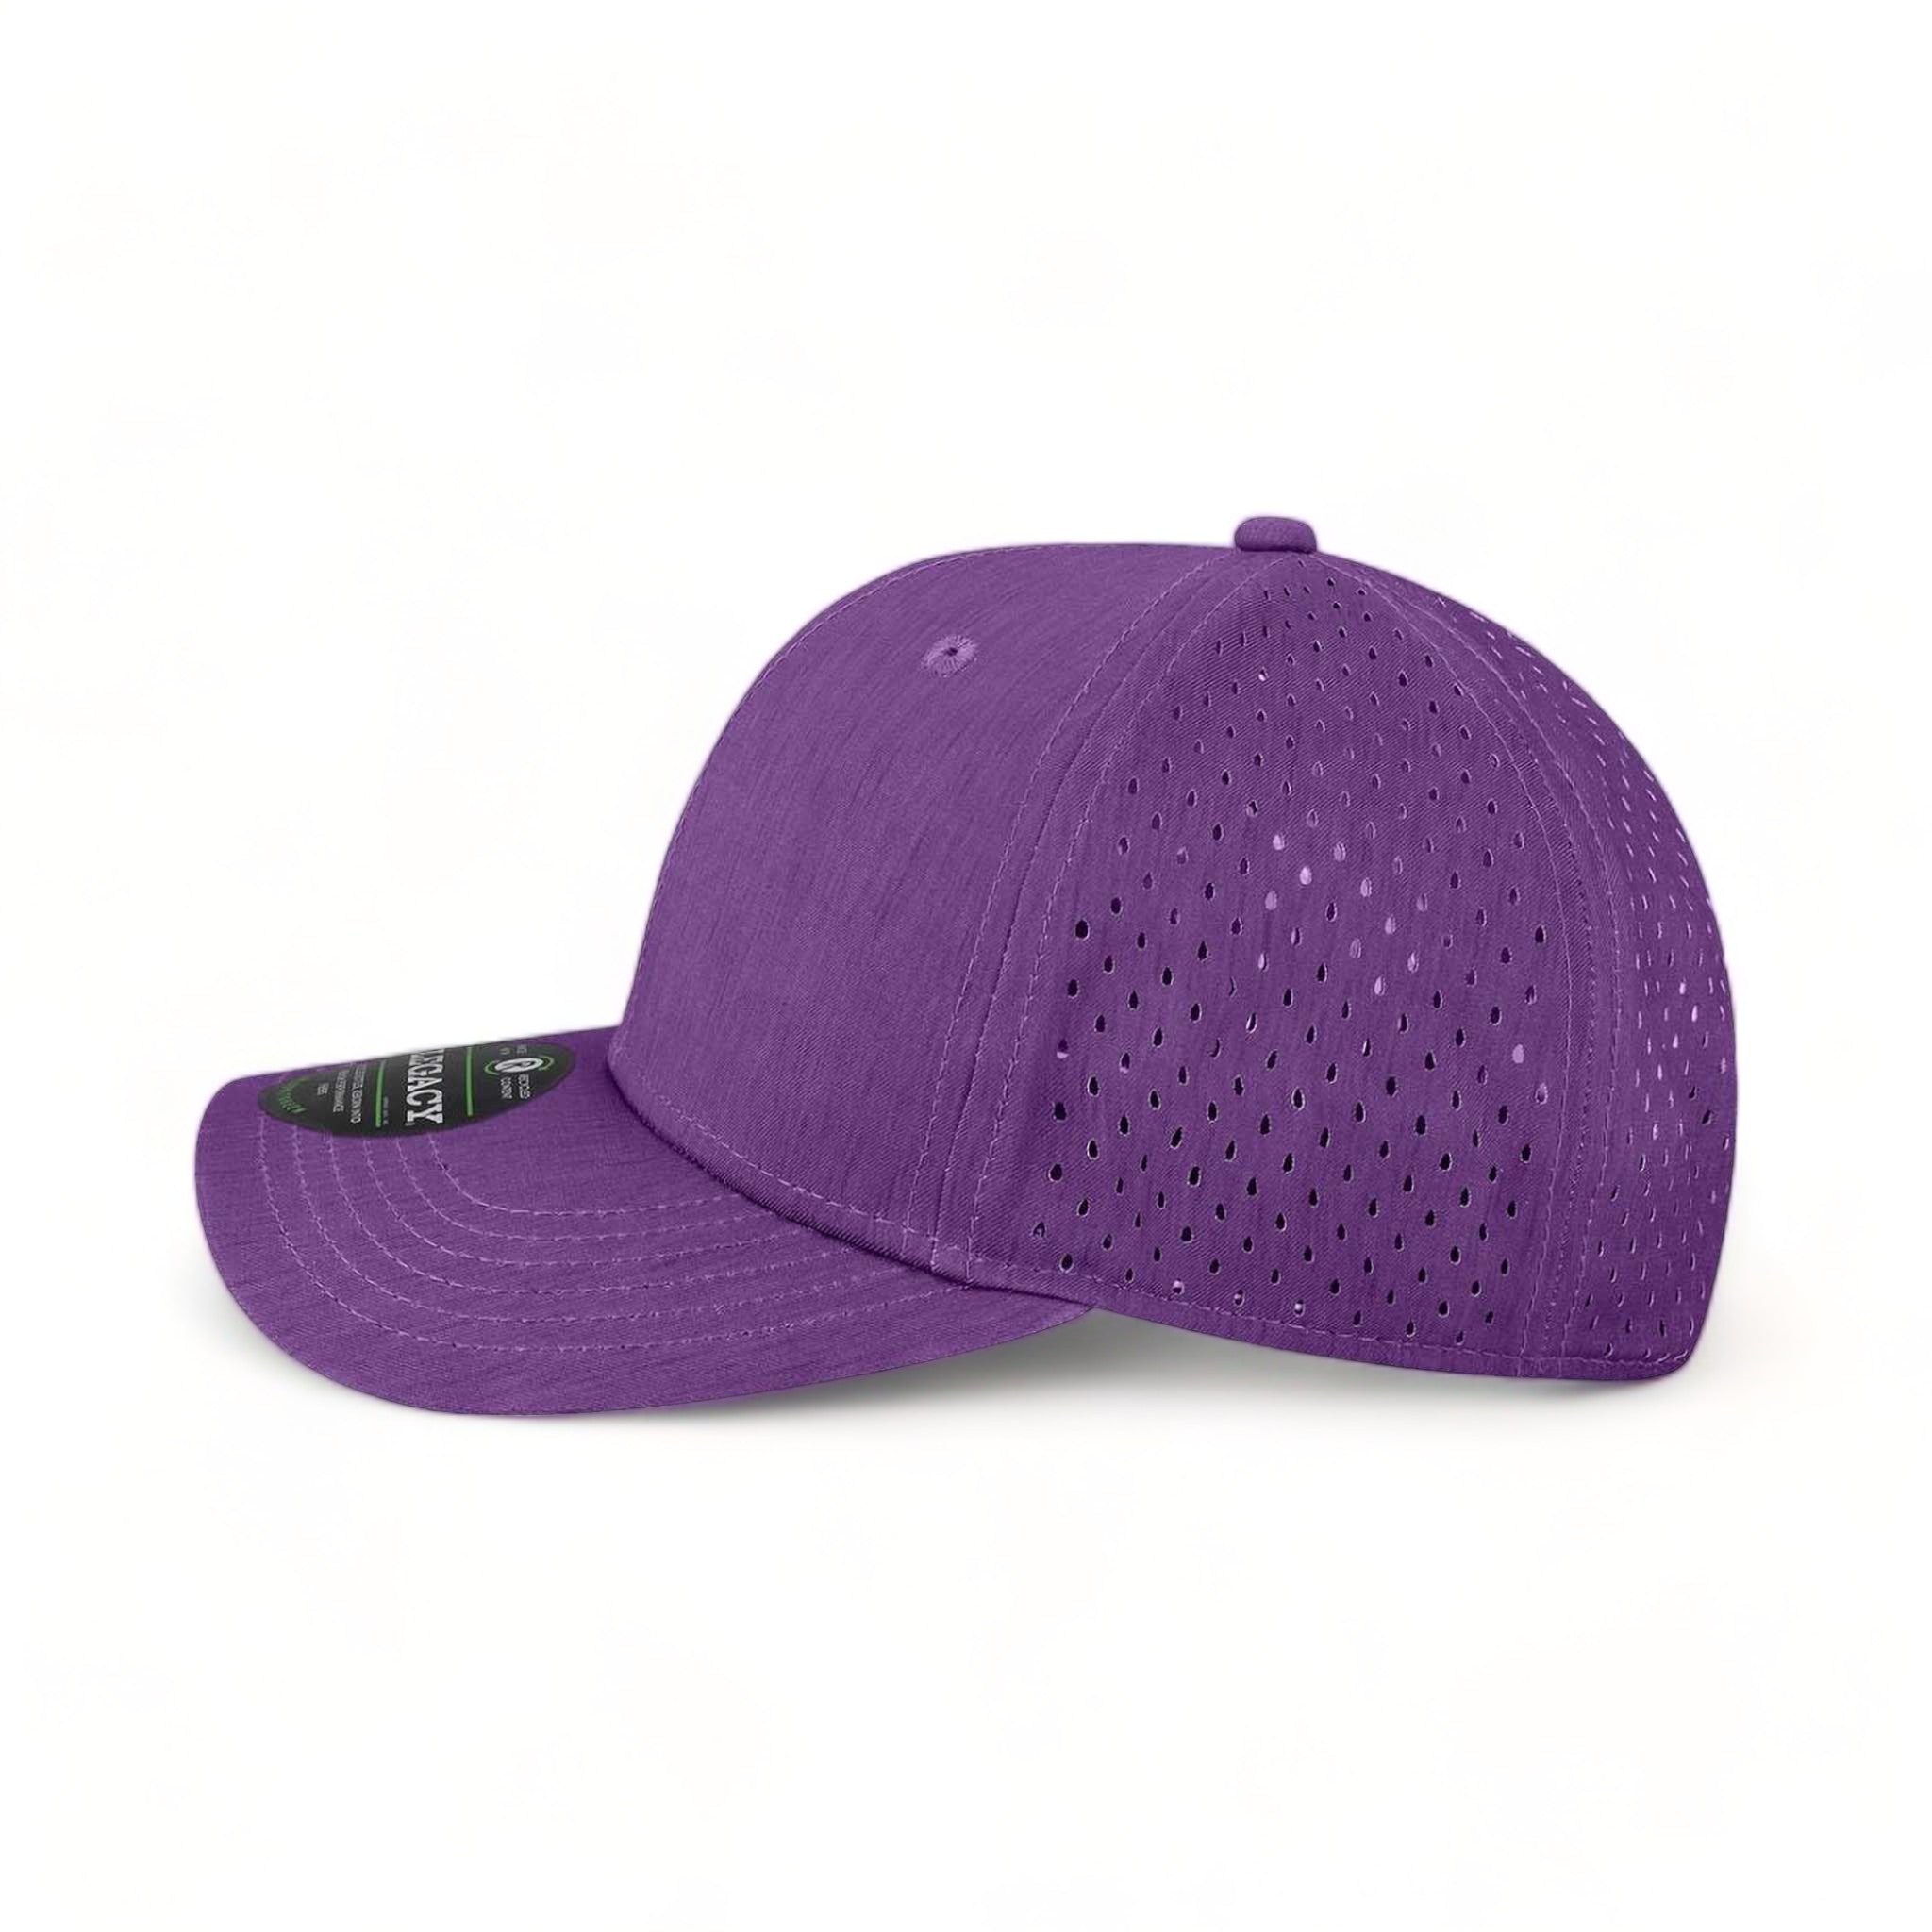 Side view of LEGACY REMPA custom hat in eco purple